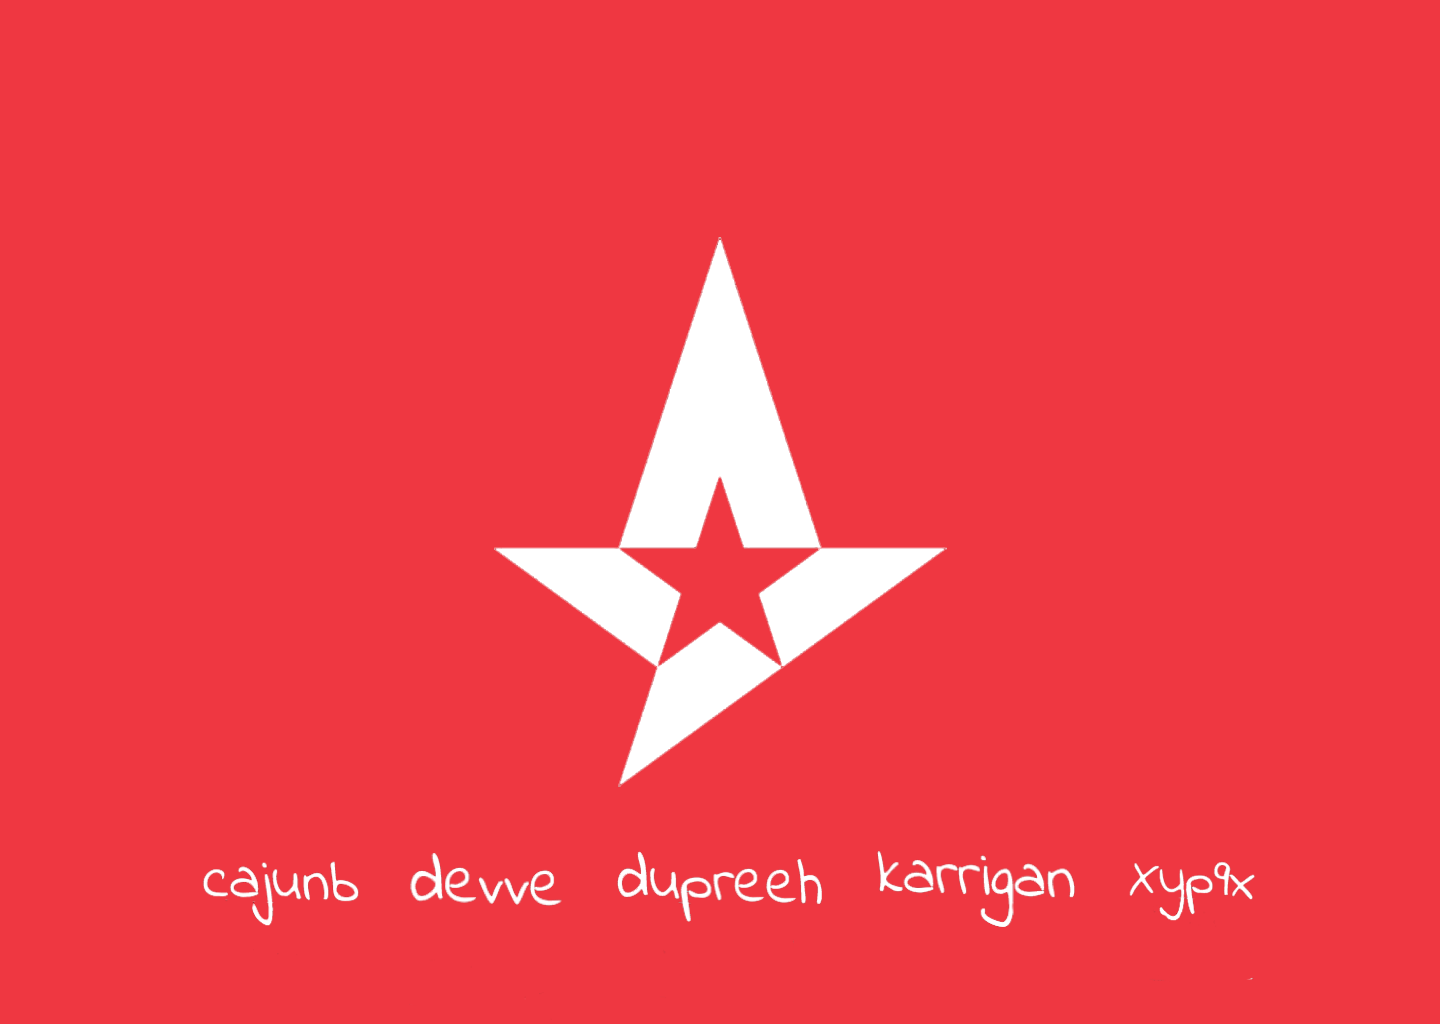 Simple Astralis Wallpaper I made